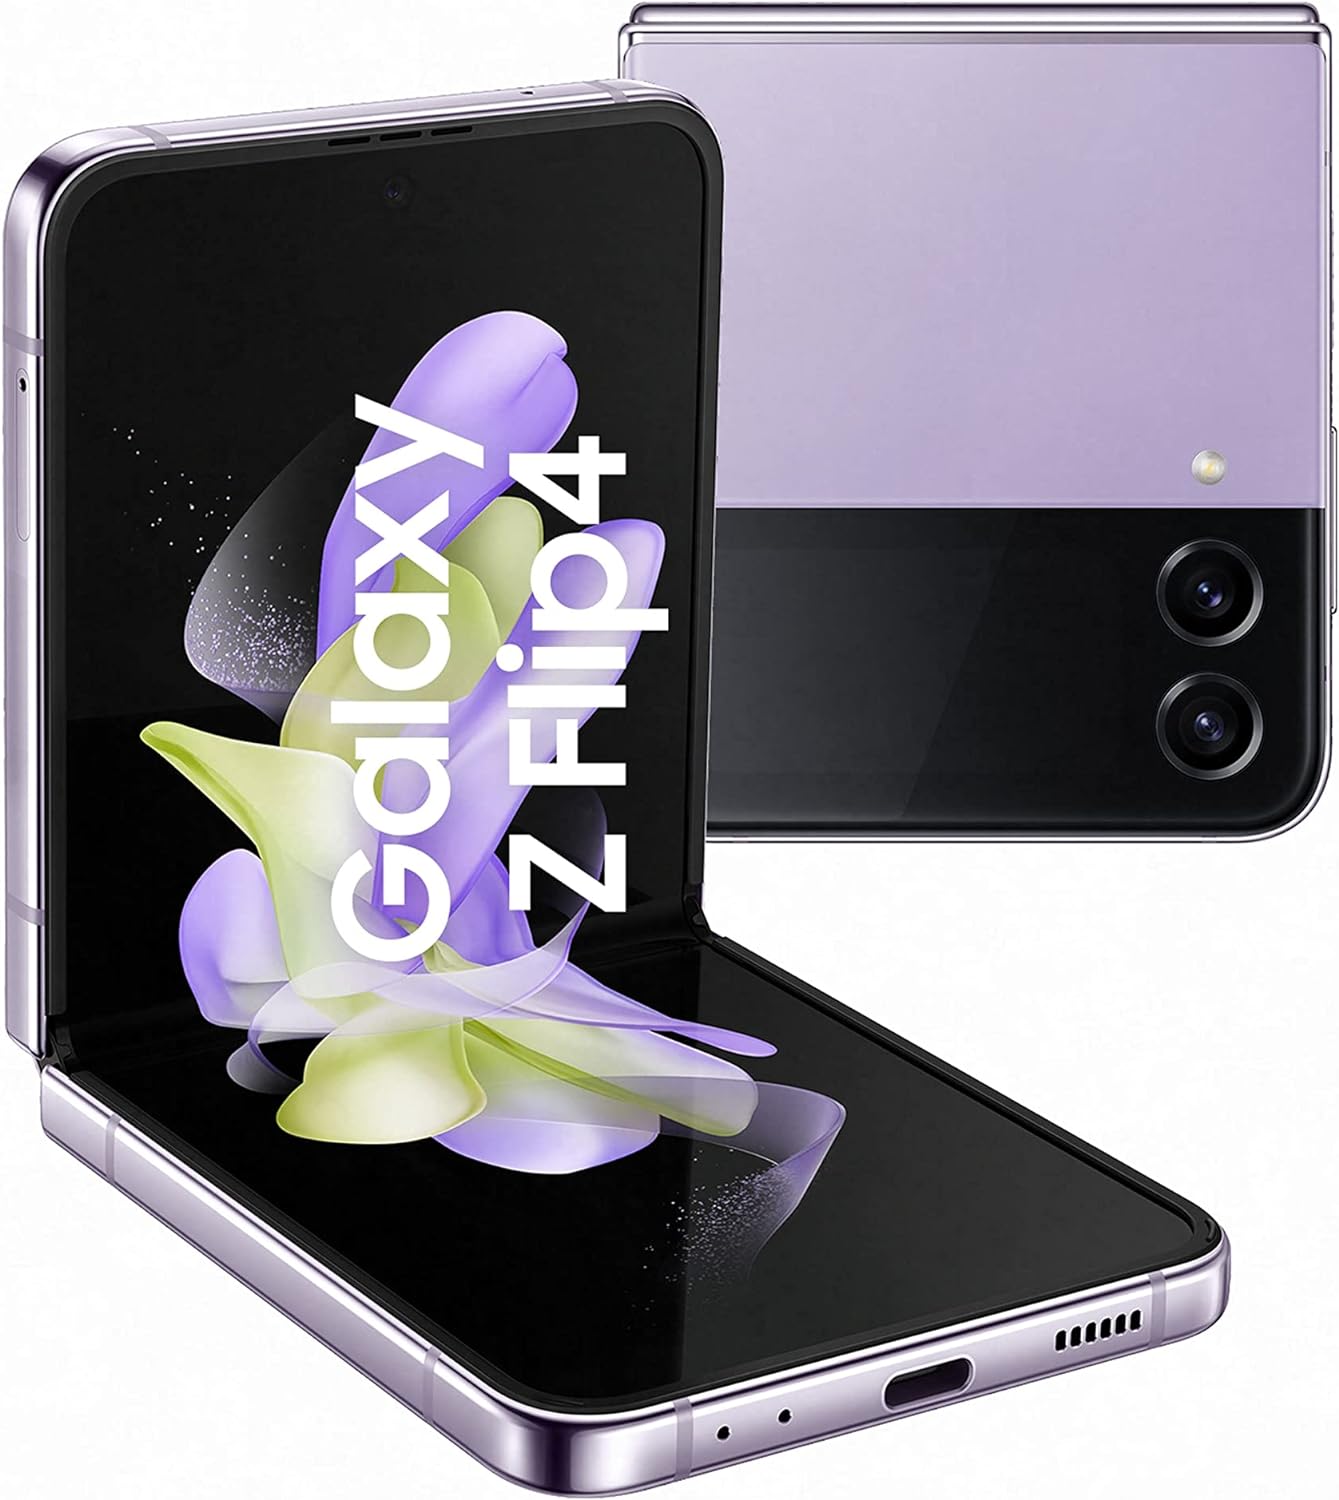 Samsung Galaxy Z Flip4 in Bora Purple - Compact folding phone with a hazy glass finish and glossy metal frame. 8806094602296